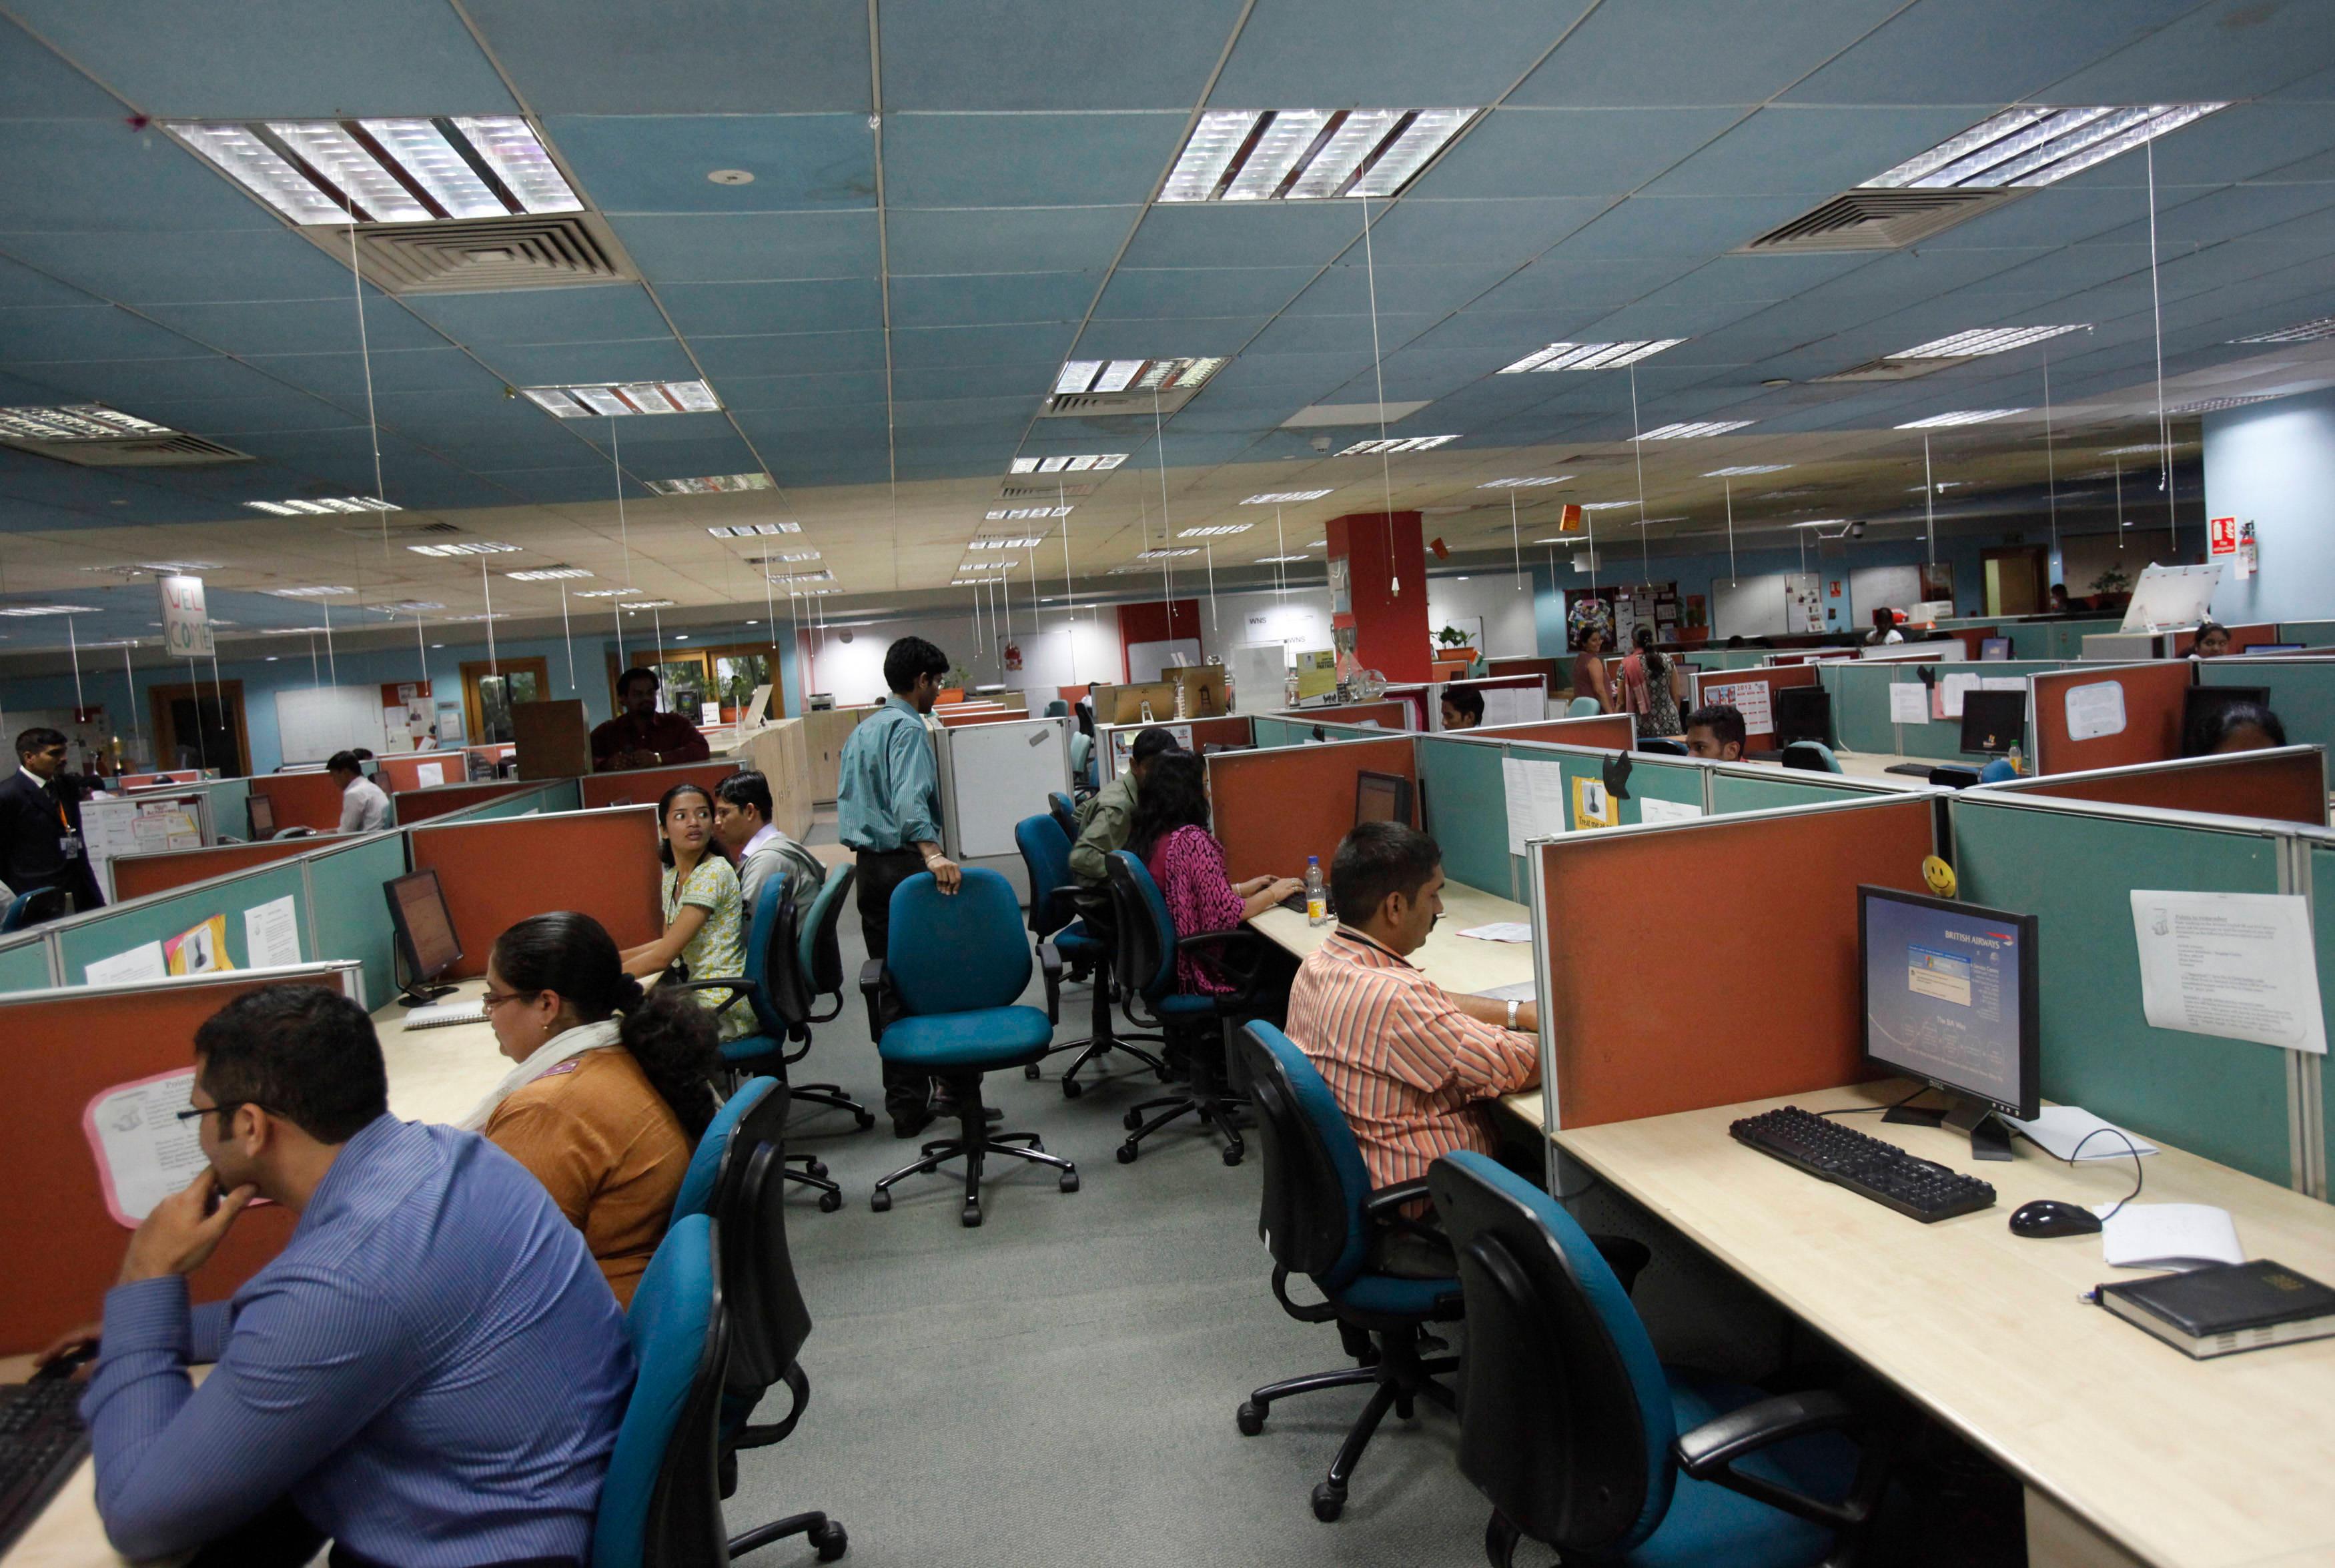 India's services activity shrank again in July, outlook turned pessimistic